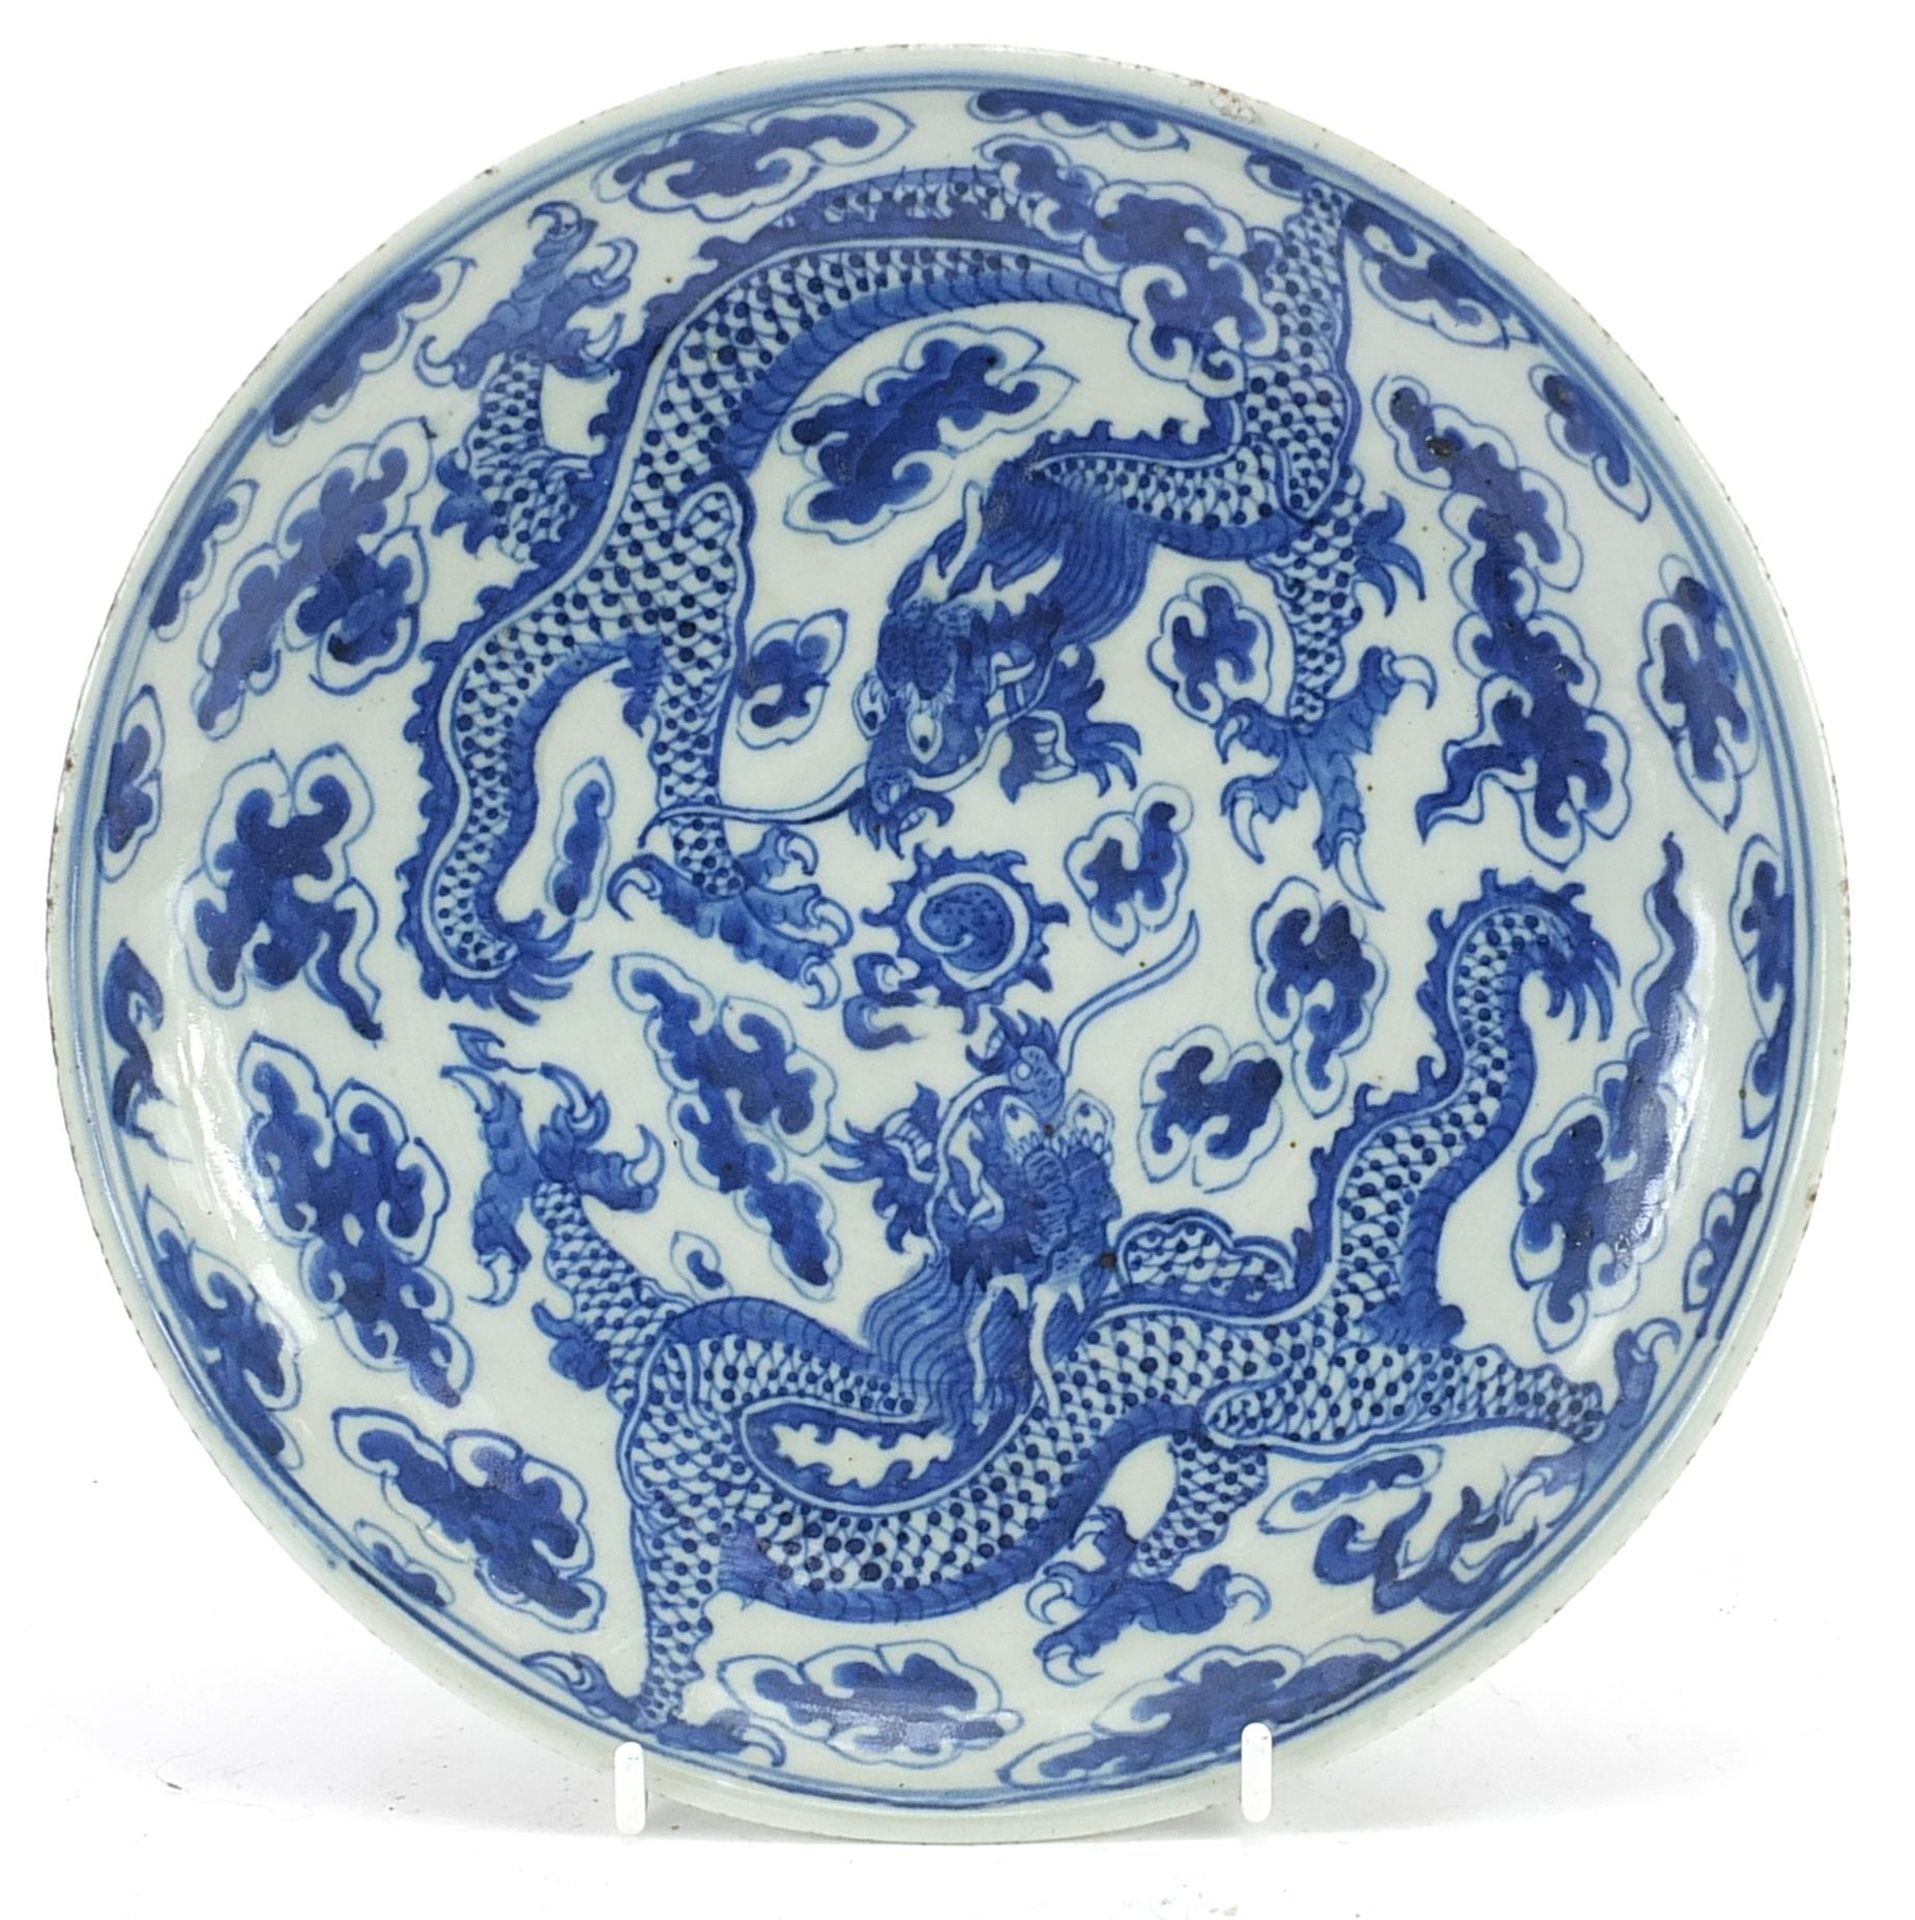 Chinese blue and white porcelain plate hand painted with two dragons chasing a flaming pearl amongst